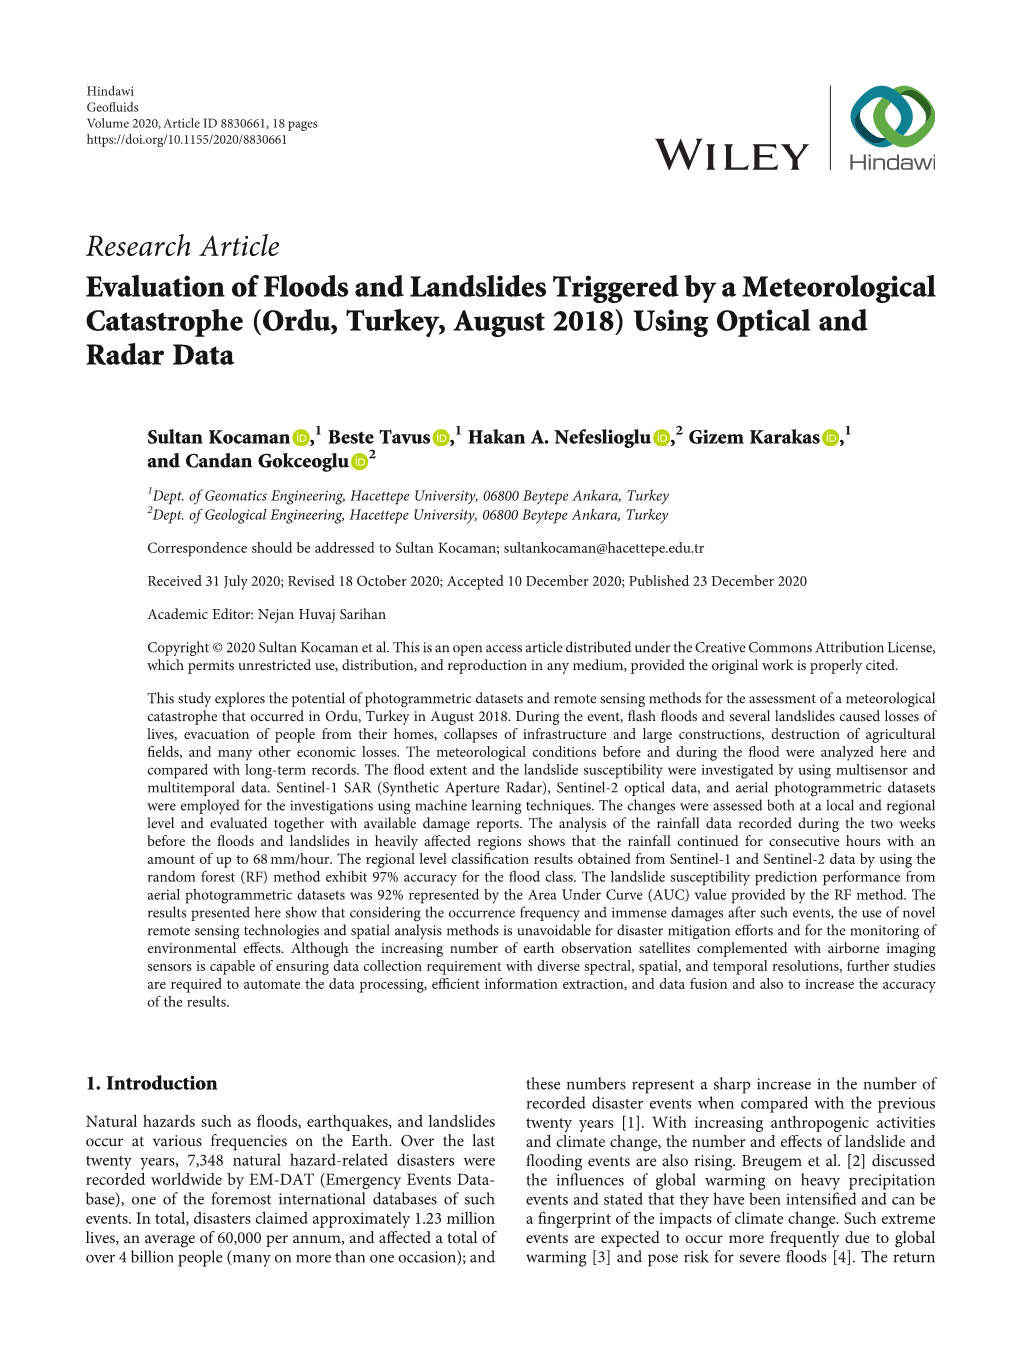 Research Article Evaluation of Floods and Landslides Triggered by a Meteorological Catastrophe (Ordu, Turkey, August 2018) Using Optical and Radar Data